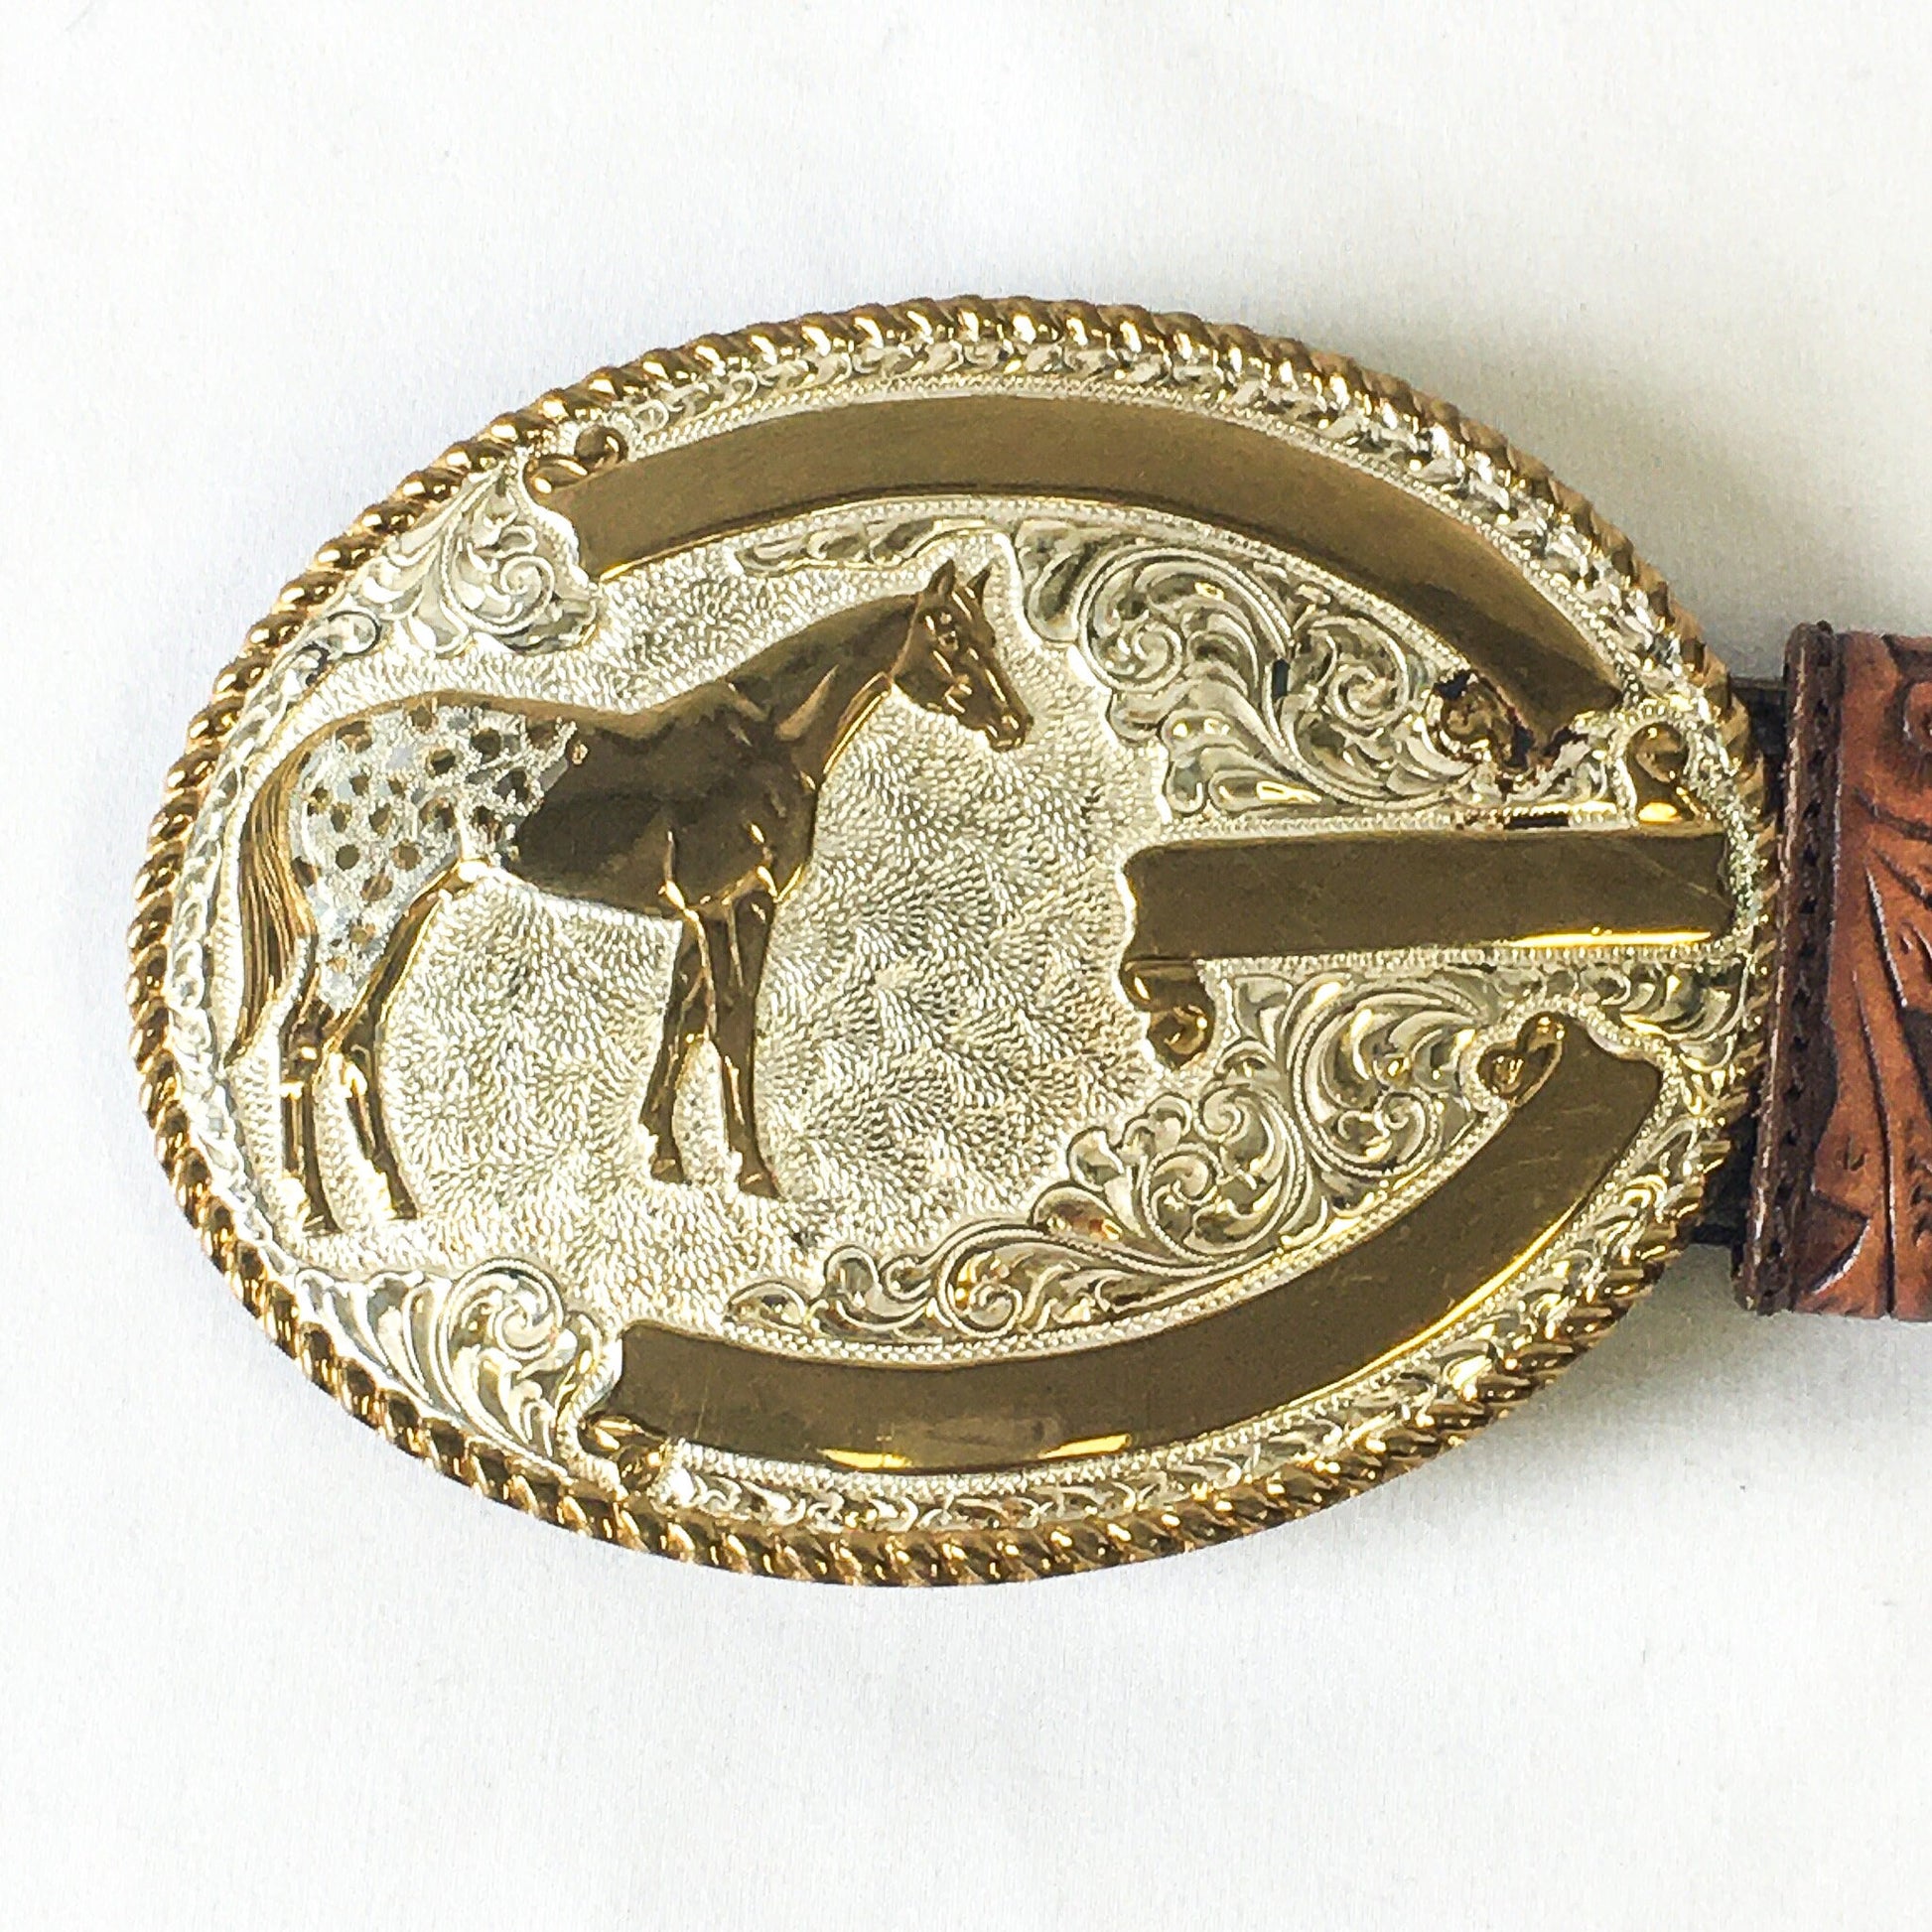 Vintage Tony Lama Woven and Floral Engraved Leather Belt with Crumrine Silver & Gold Tone Bronze Horse Buckle, Sz. 34, Vintage Western Belt